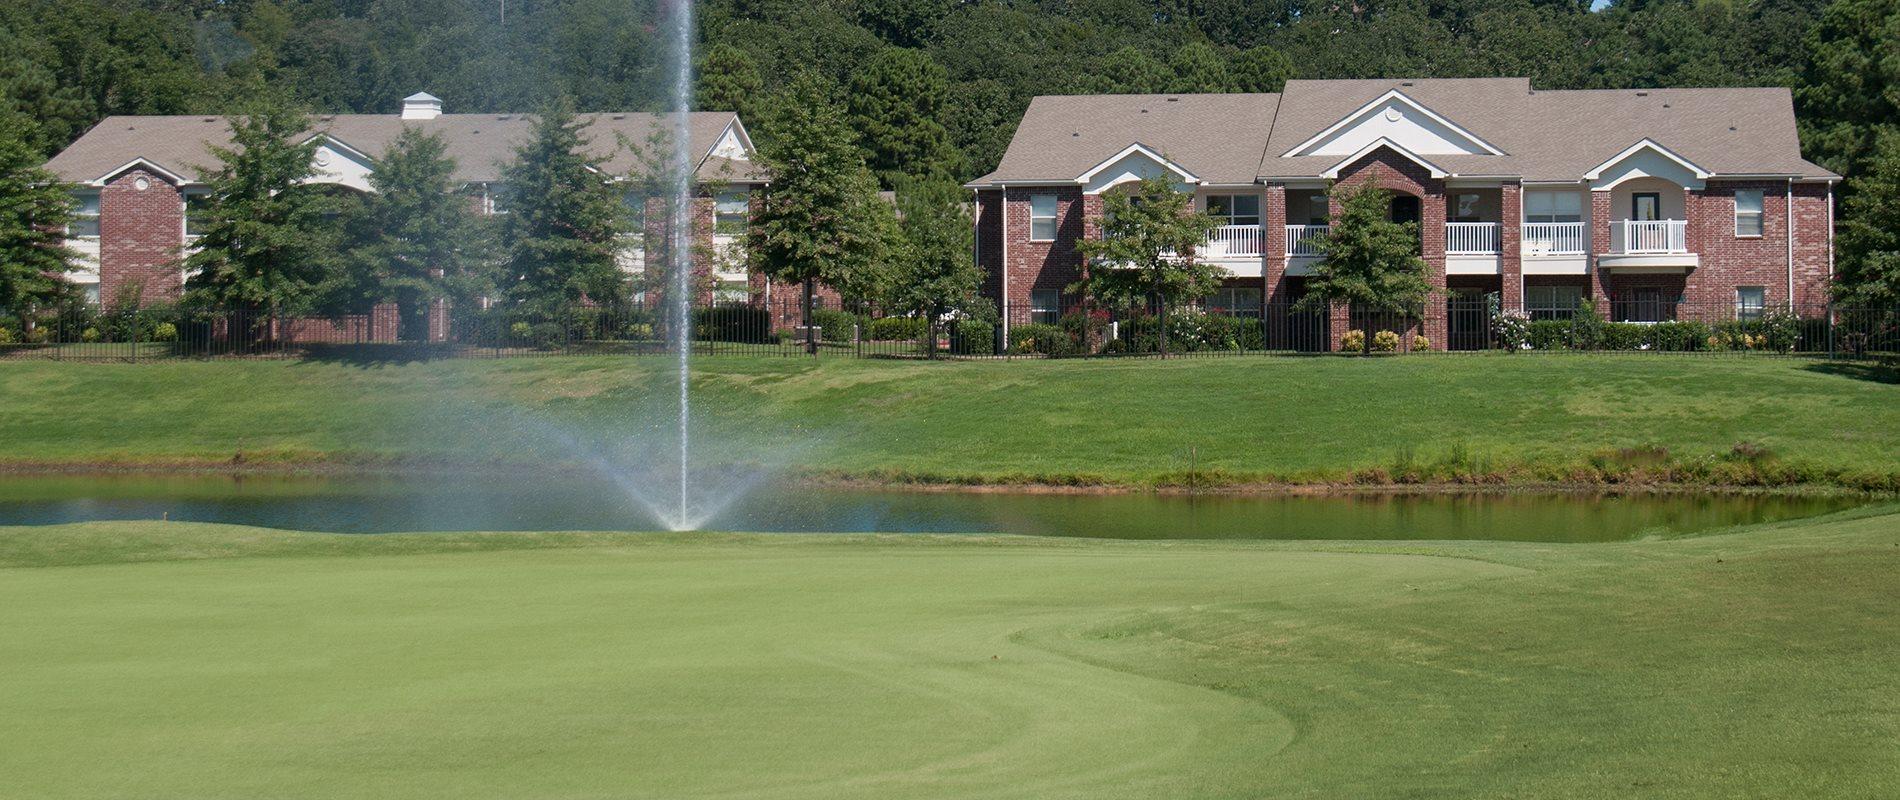 Mature Landscaping at The Links at Cadron Valley, Conway, AR 72034